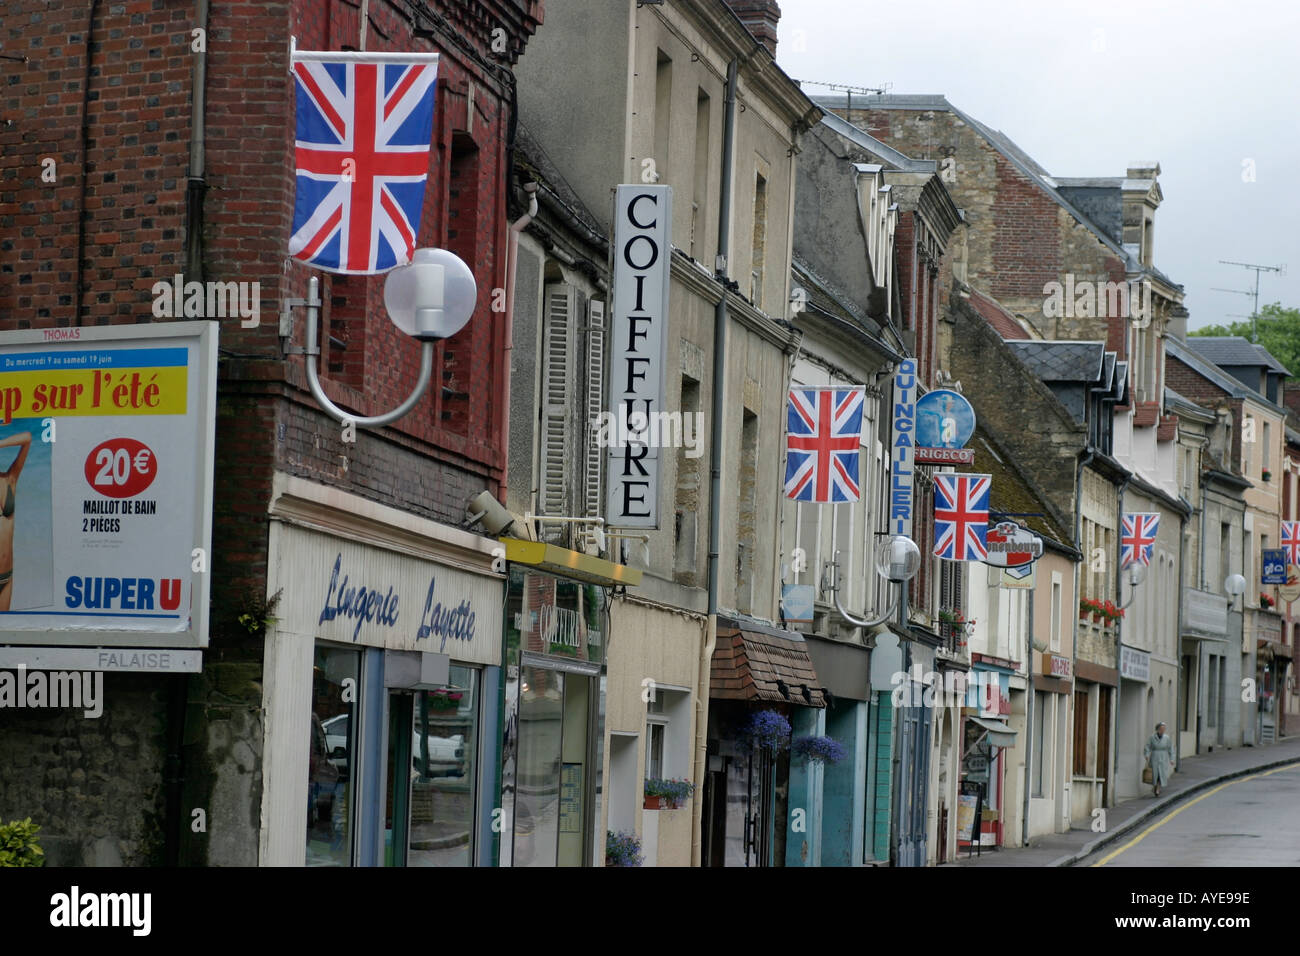 Union Jacks flying in a street in St Pierre sur Dives during the D Day Diamond Jubilee Commemorations 2004 Normandy France Stock Photo